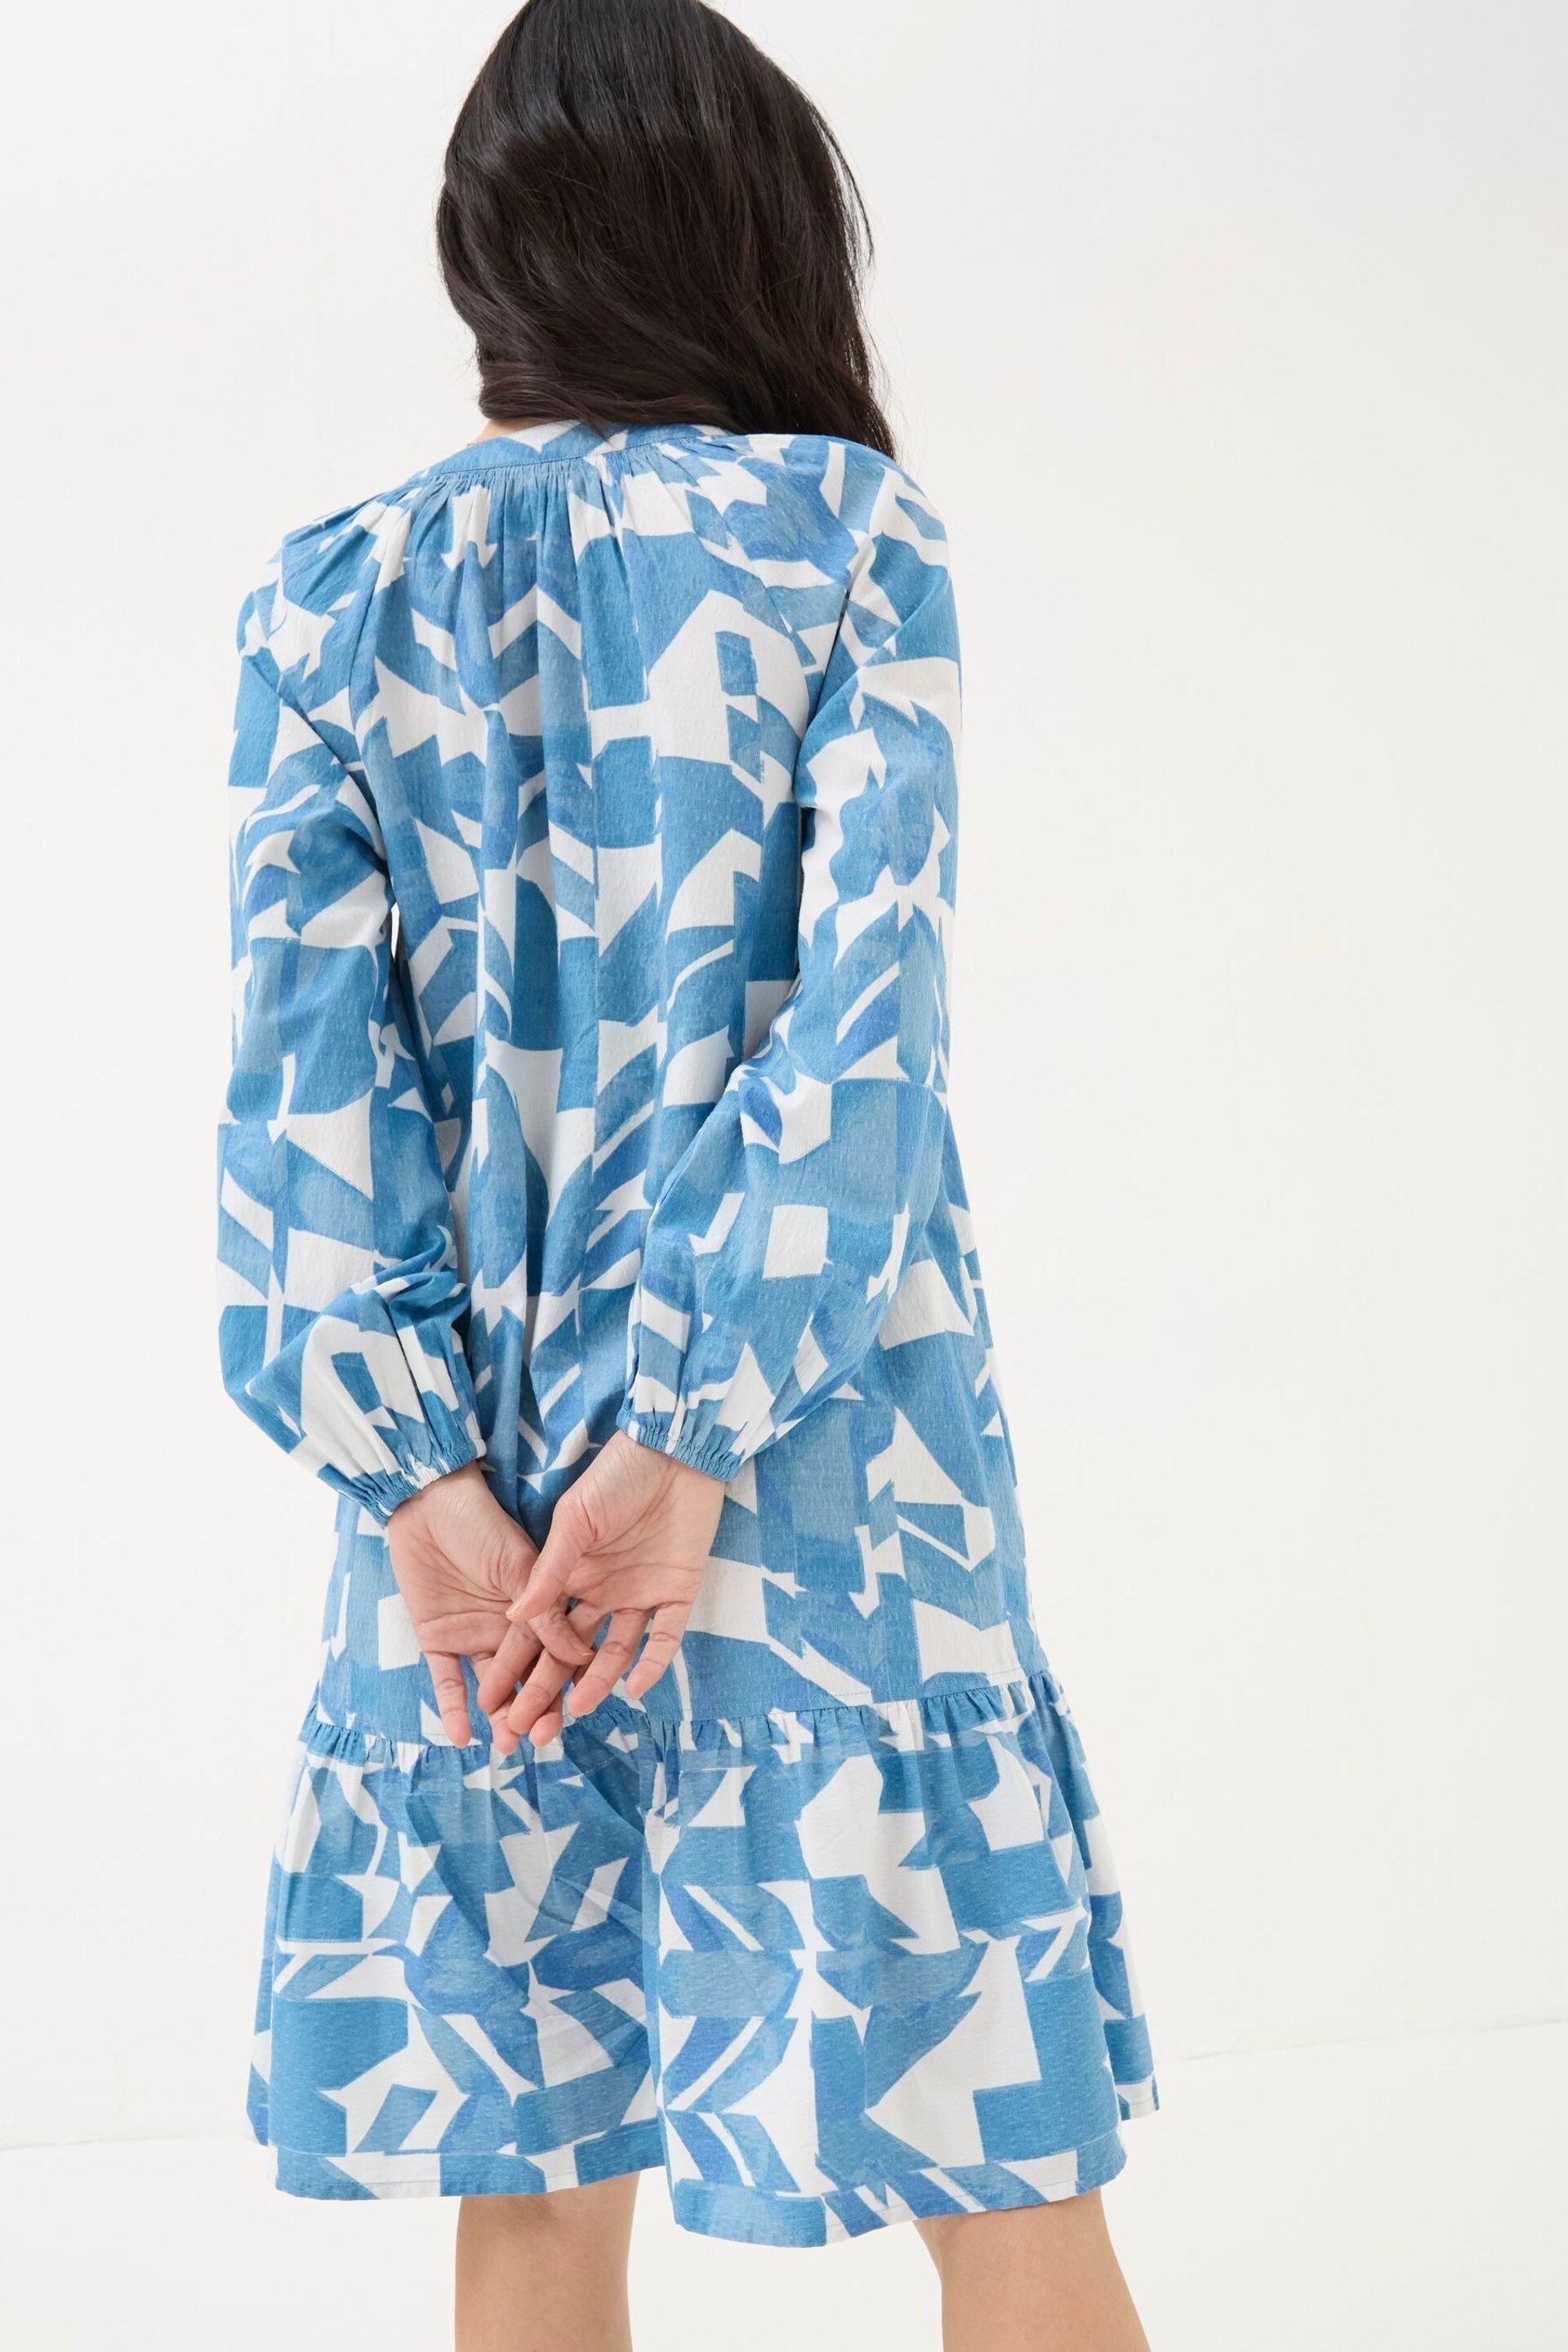 FatFace Blue Amy Med Geo Dress - Image 2 of 7